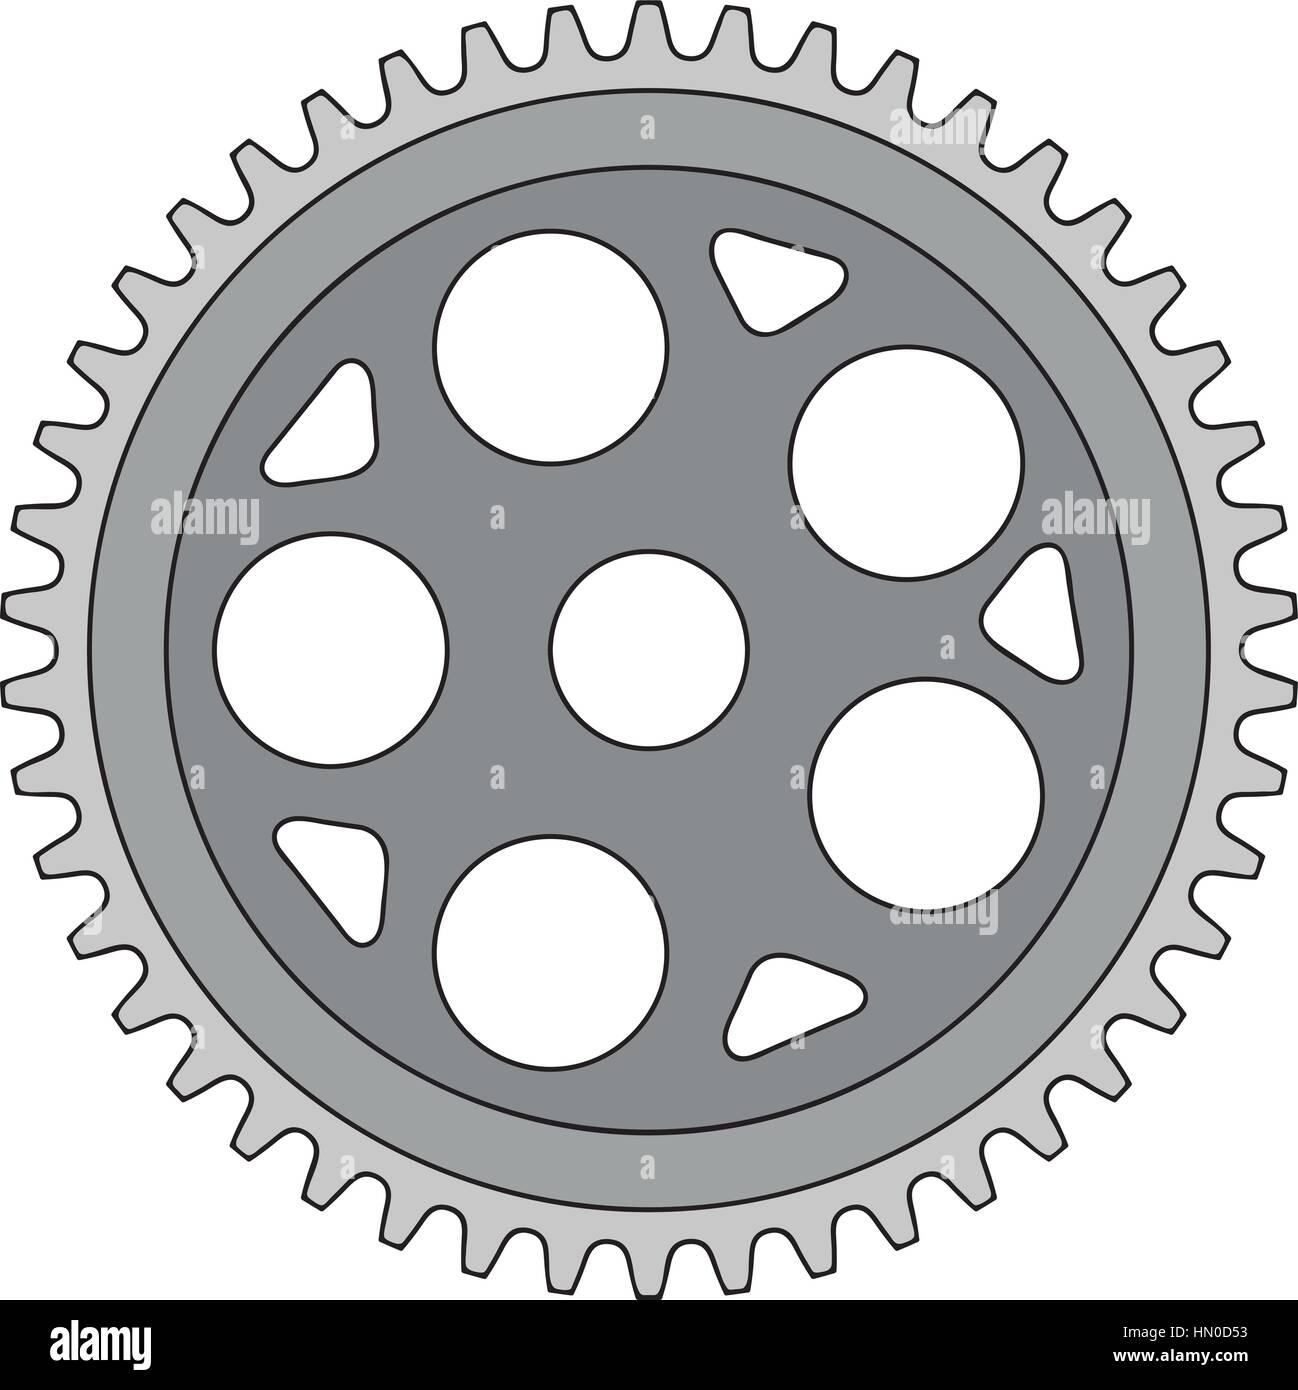 Illustration of a vintage single ring crank set on isolated white background done in retro style. Stock Vector